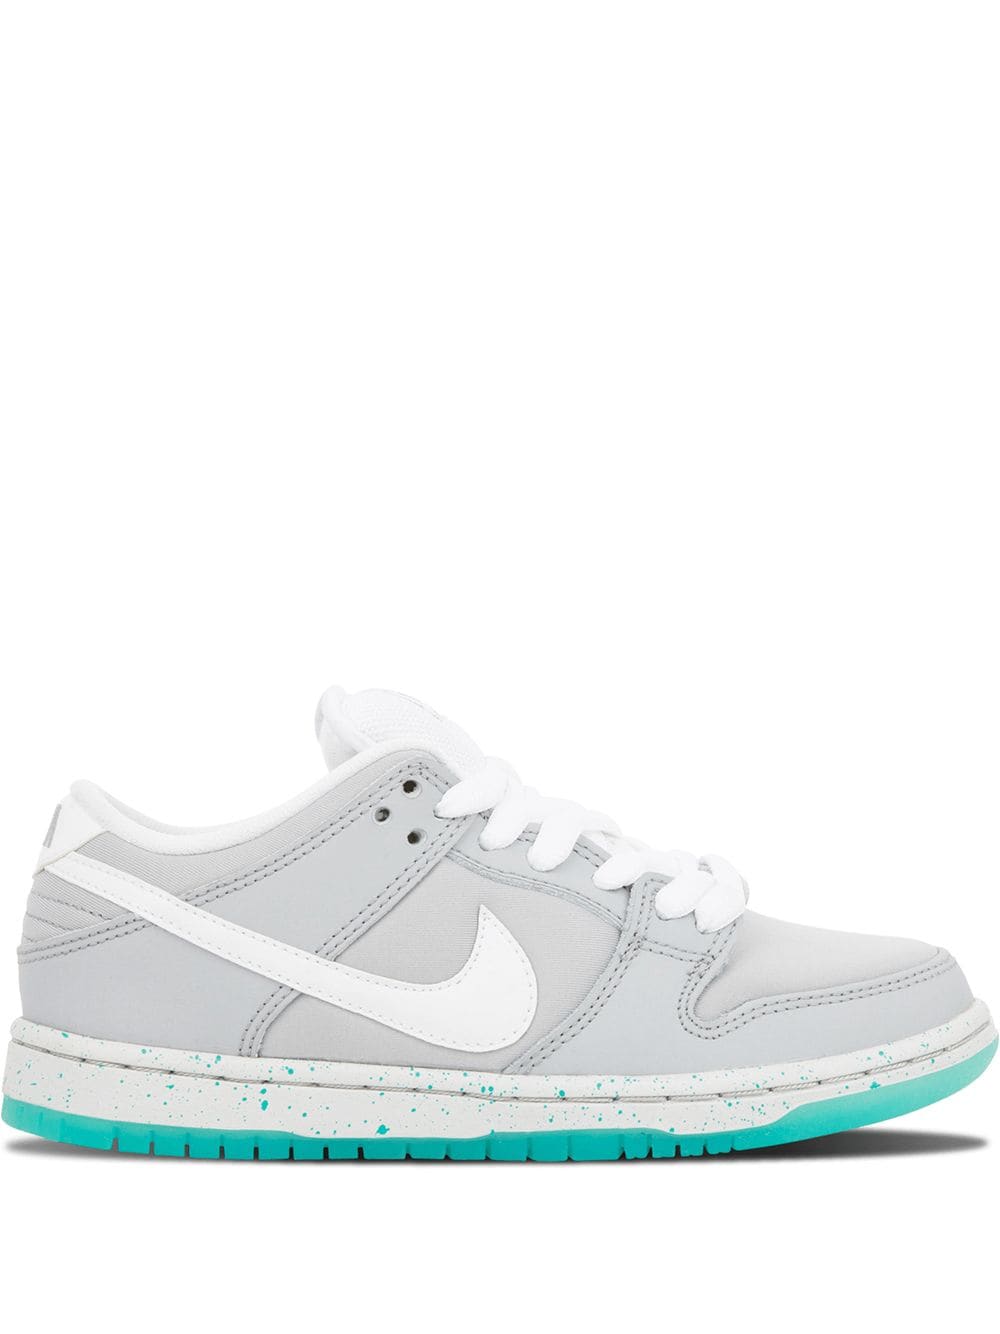 sb dunk low marty mcfly